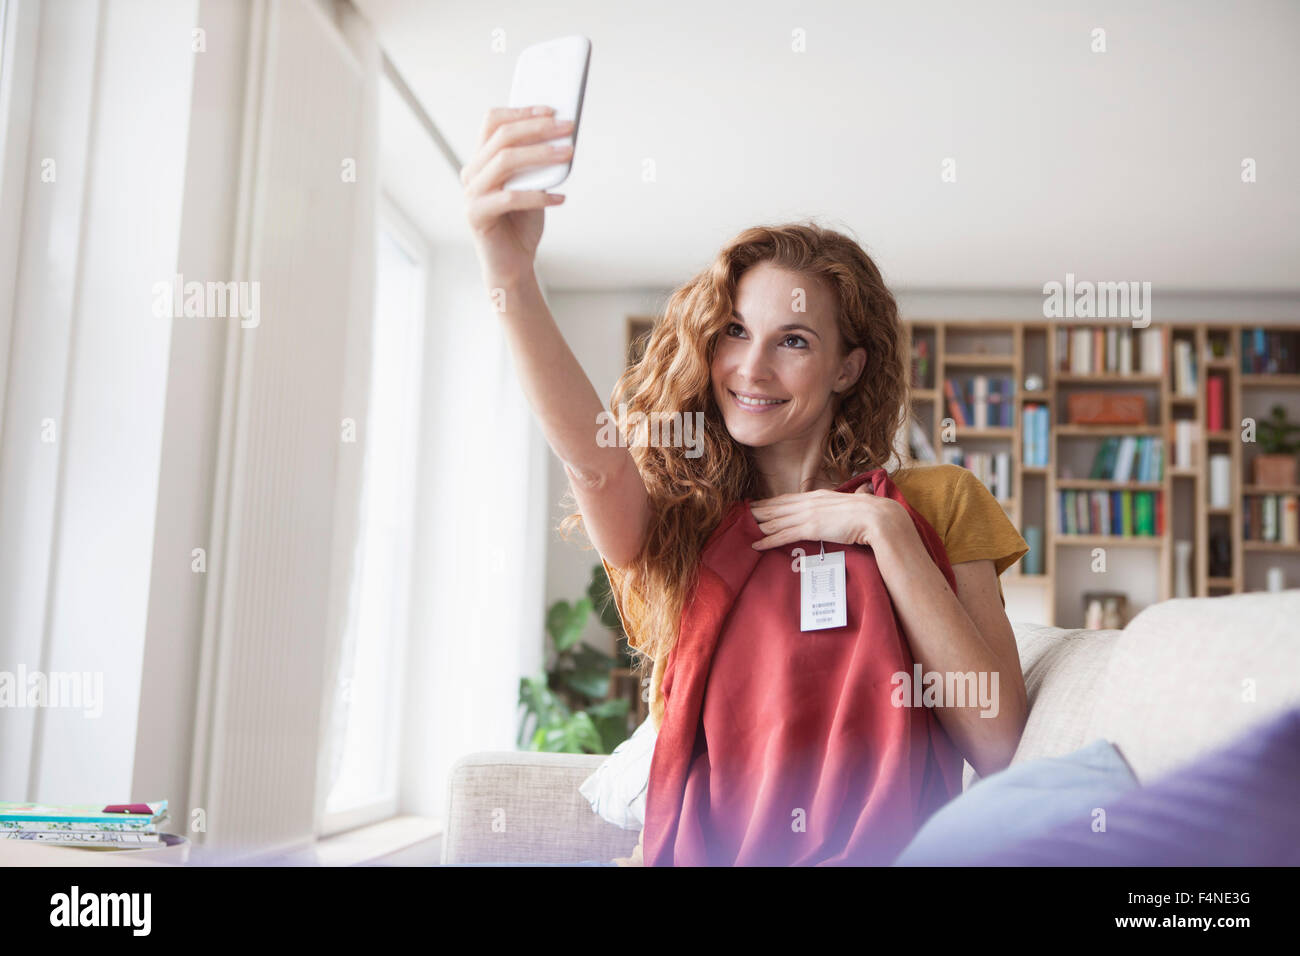 Smiling woman at home taking a selfie with new garment Stock Photo